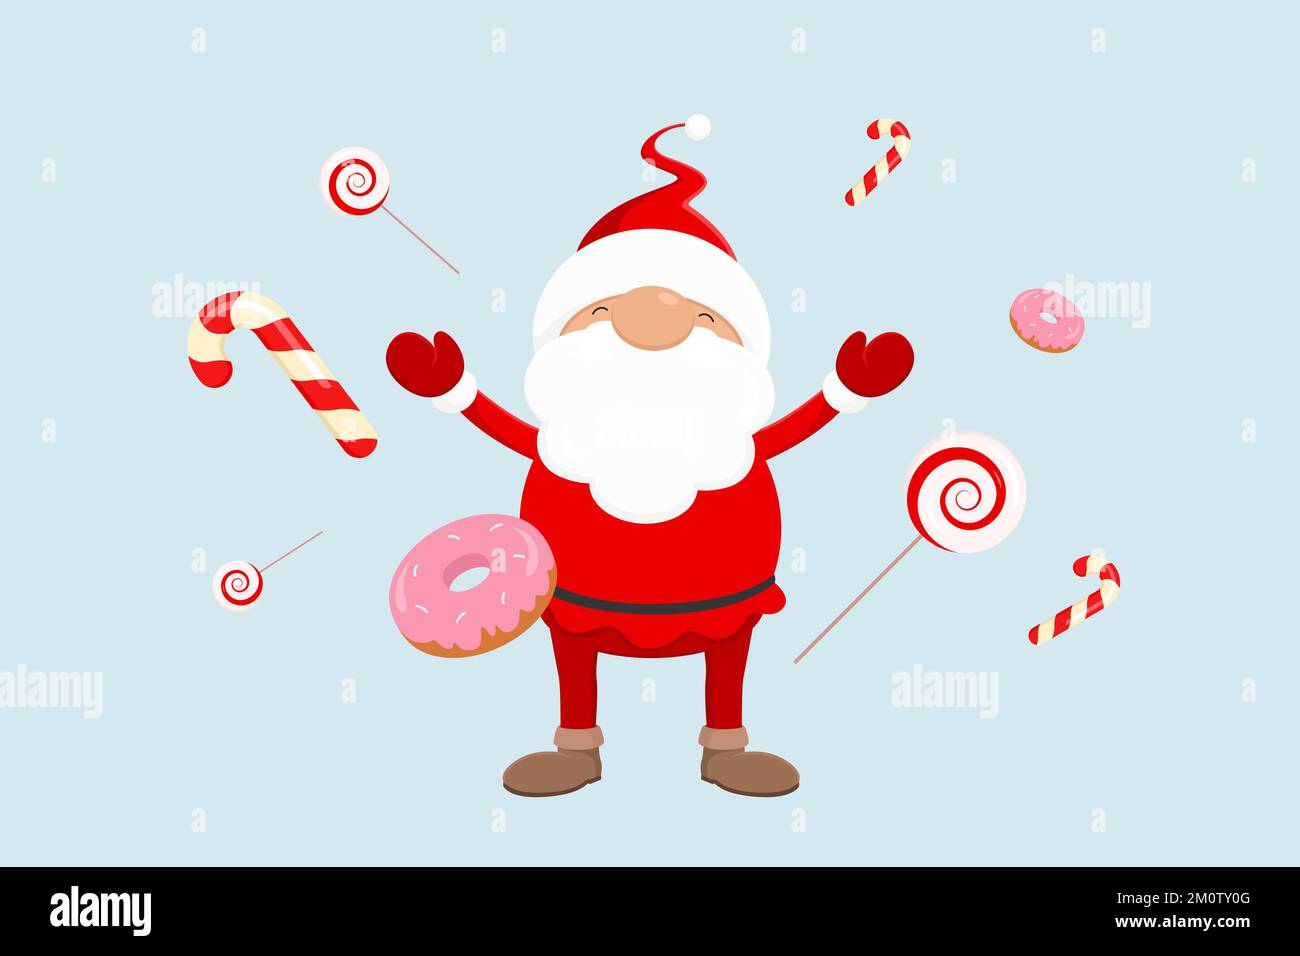 Santa and sweets - donuts, candy canes, swirl lollipops. Vector illustration. Stock Vector